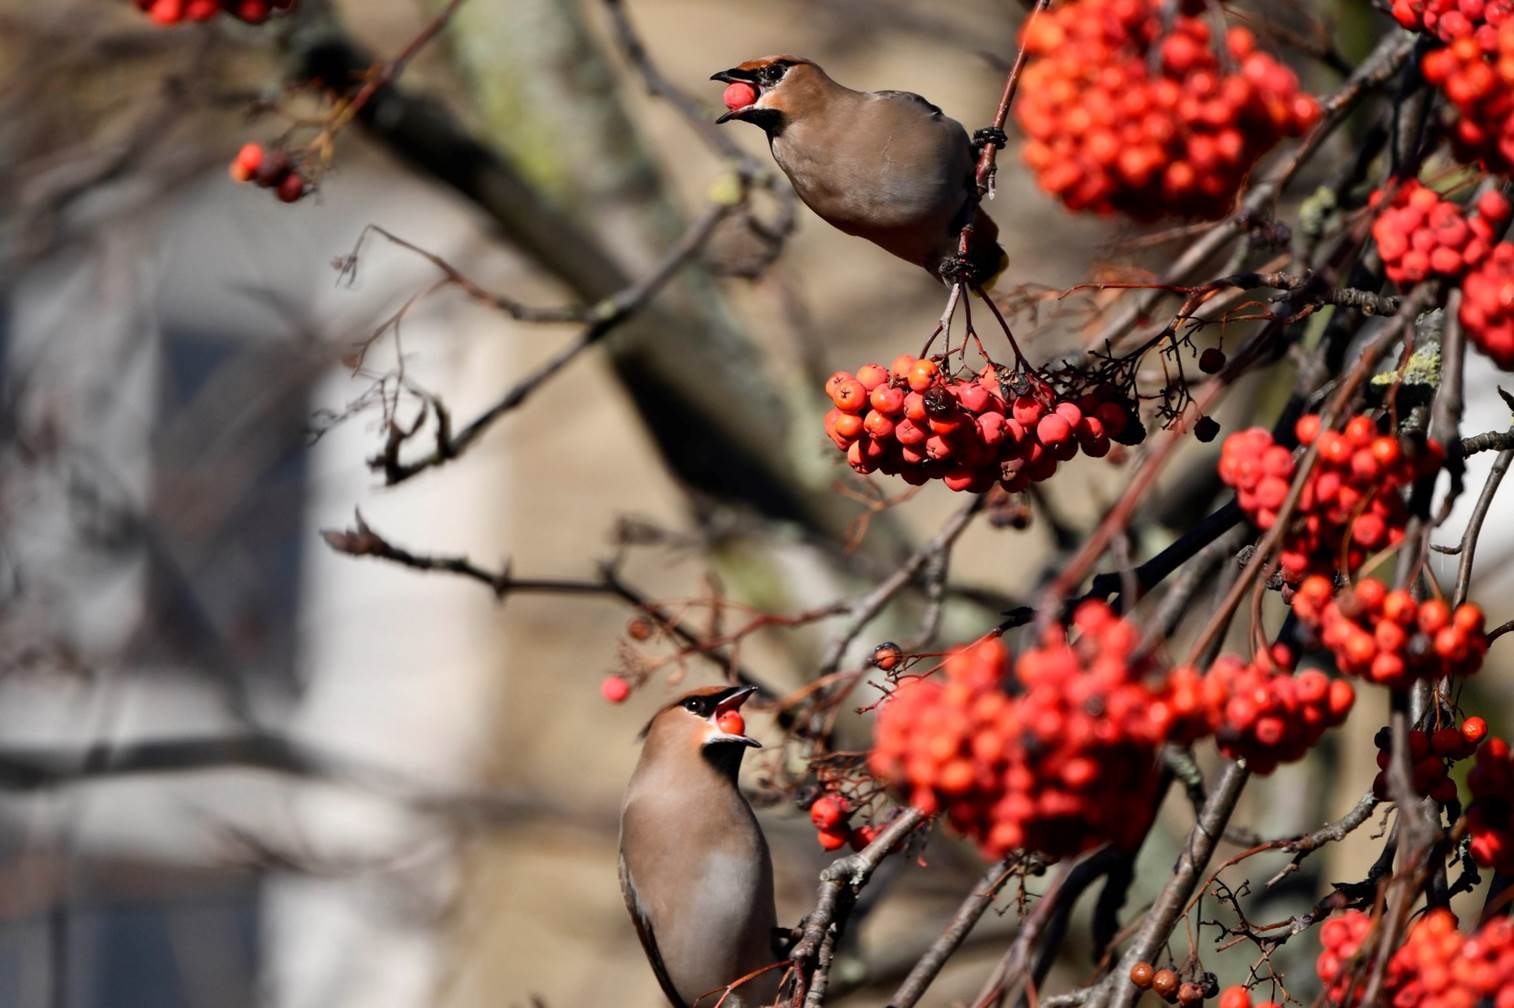 Birds on a tree with berries

Description automatically generated